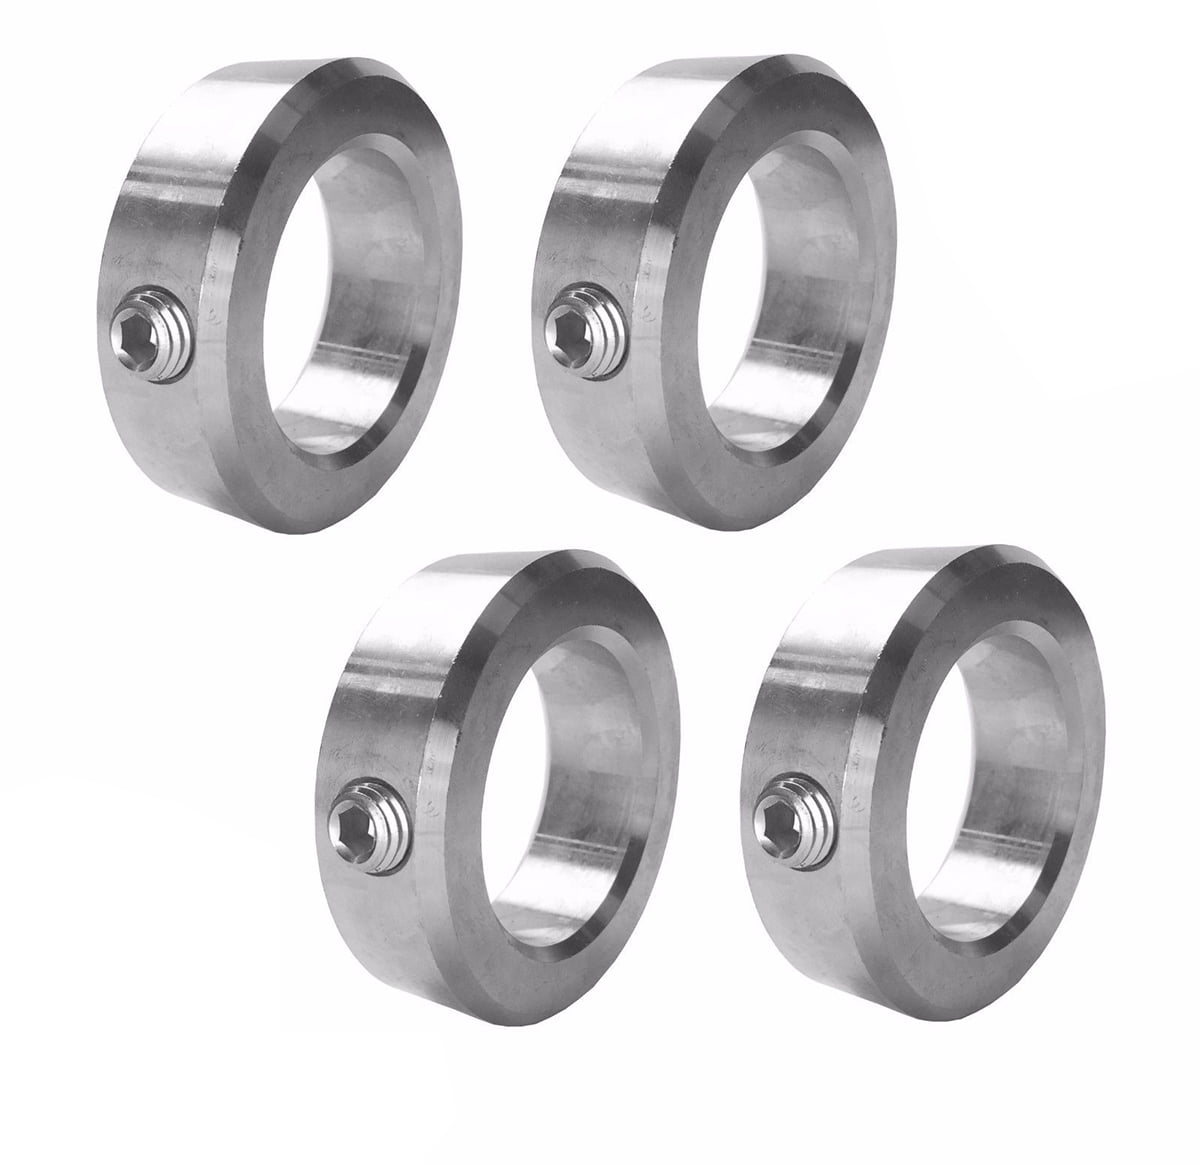 4 PCS 1/2 Bore Stainless Steel Shaft Collars Set Screw Style